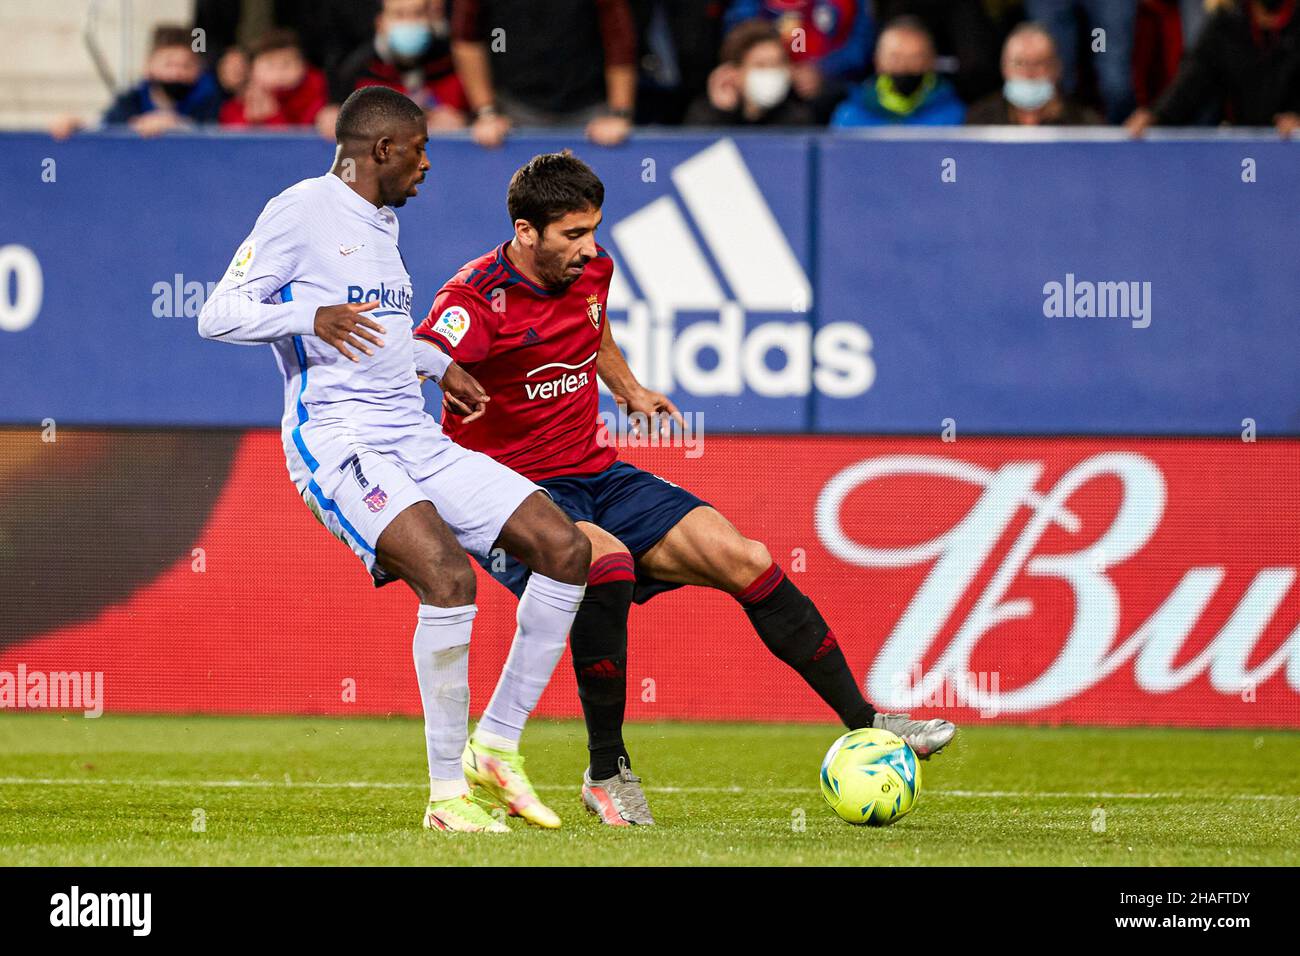 Pamplona, Spain. 12th Dec, 2021. Jose Angel Valdes 'Cote' (R), defender of CA Osasuna and Ousmane Dembelé (L), forward of FC Barcelona are seen in action during the Spanish football of La Liga Santander, the match between CA Osasuna and FC Barcelona at the Sadar stadium in Pamplona.(Final score; CA Osasuna 2:2 FC Barcelona) Credit: SOPA Images Limited/Alamy Live News Stock Photo